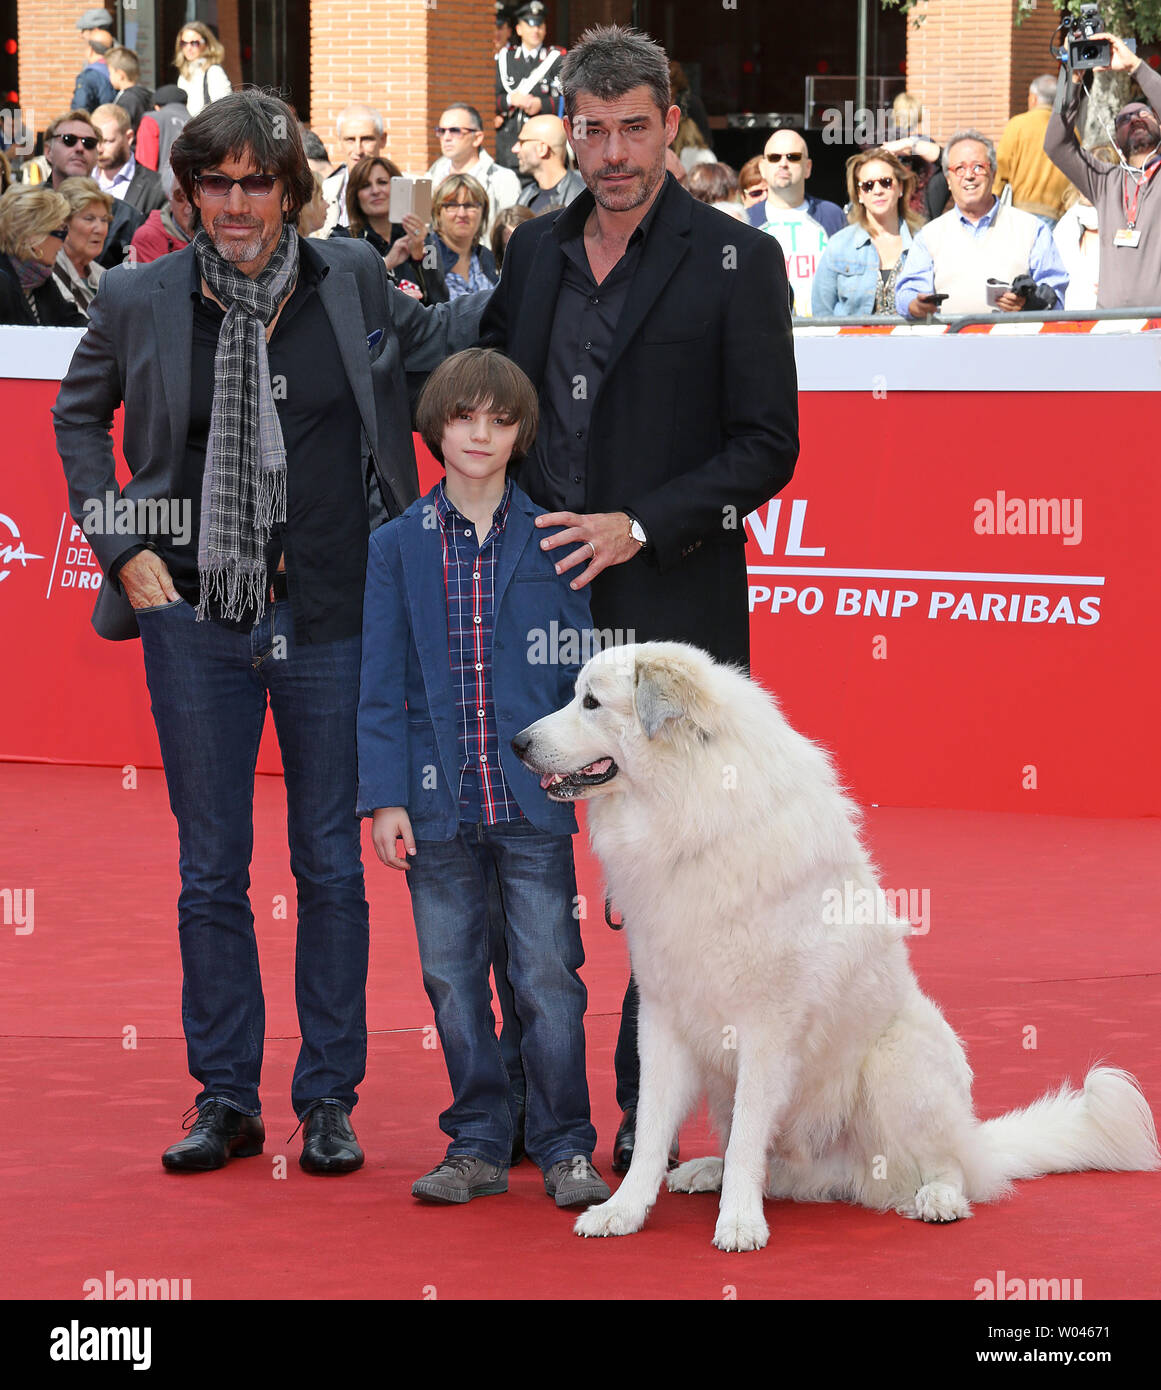 Christian Duguay (L), Felix Bossuet (C) and Thierry Neuvic arrive on the red carpet before the screening of the film 'Belle et Sebastien, l'aventure continue' at the 10th annual Rome International Film Festival in Rome on October 17, 2015.   UPI/David Silpa Stock Photo